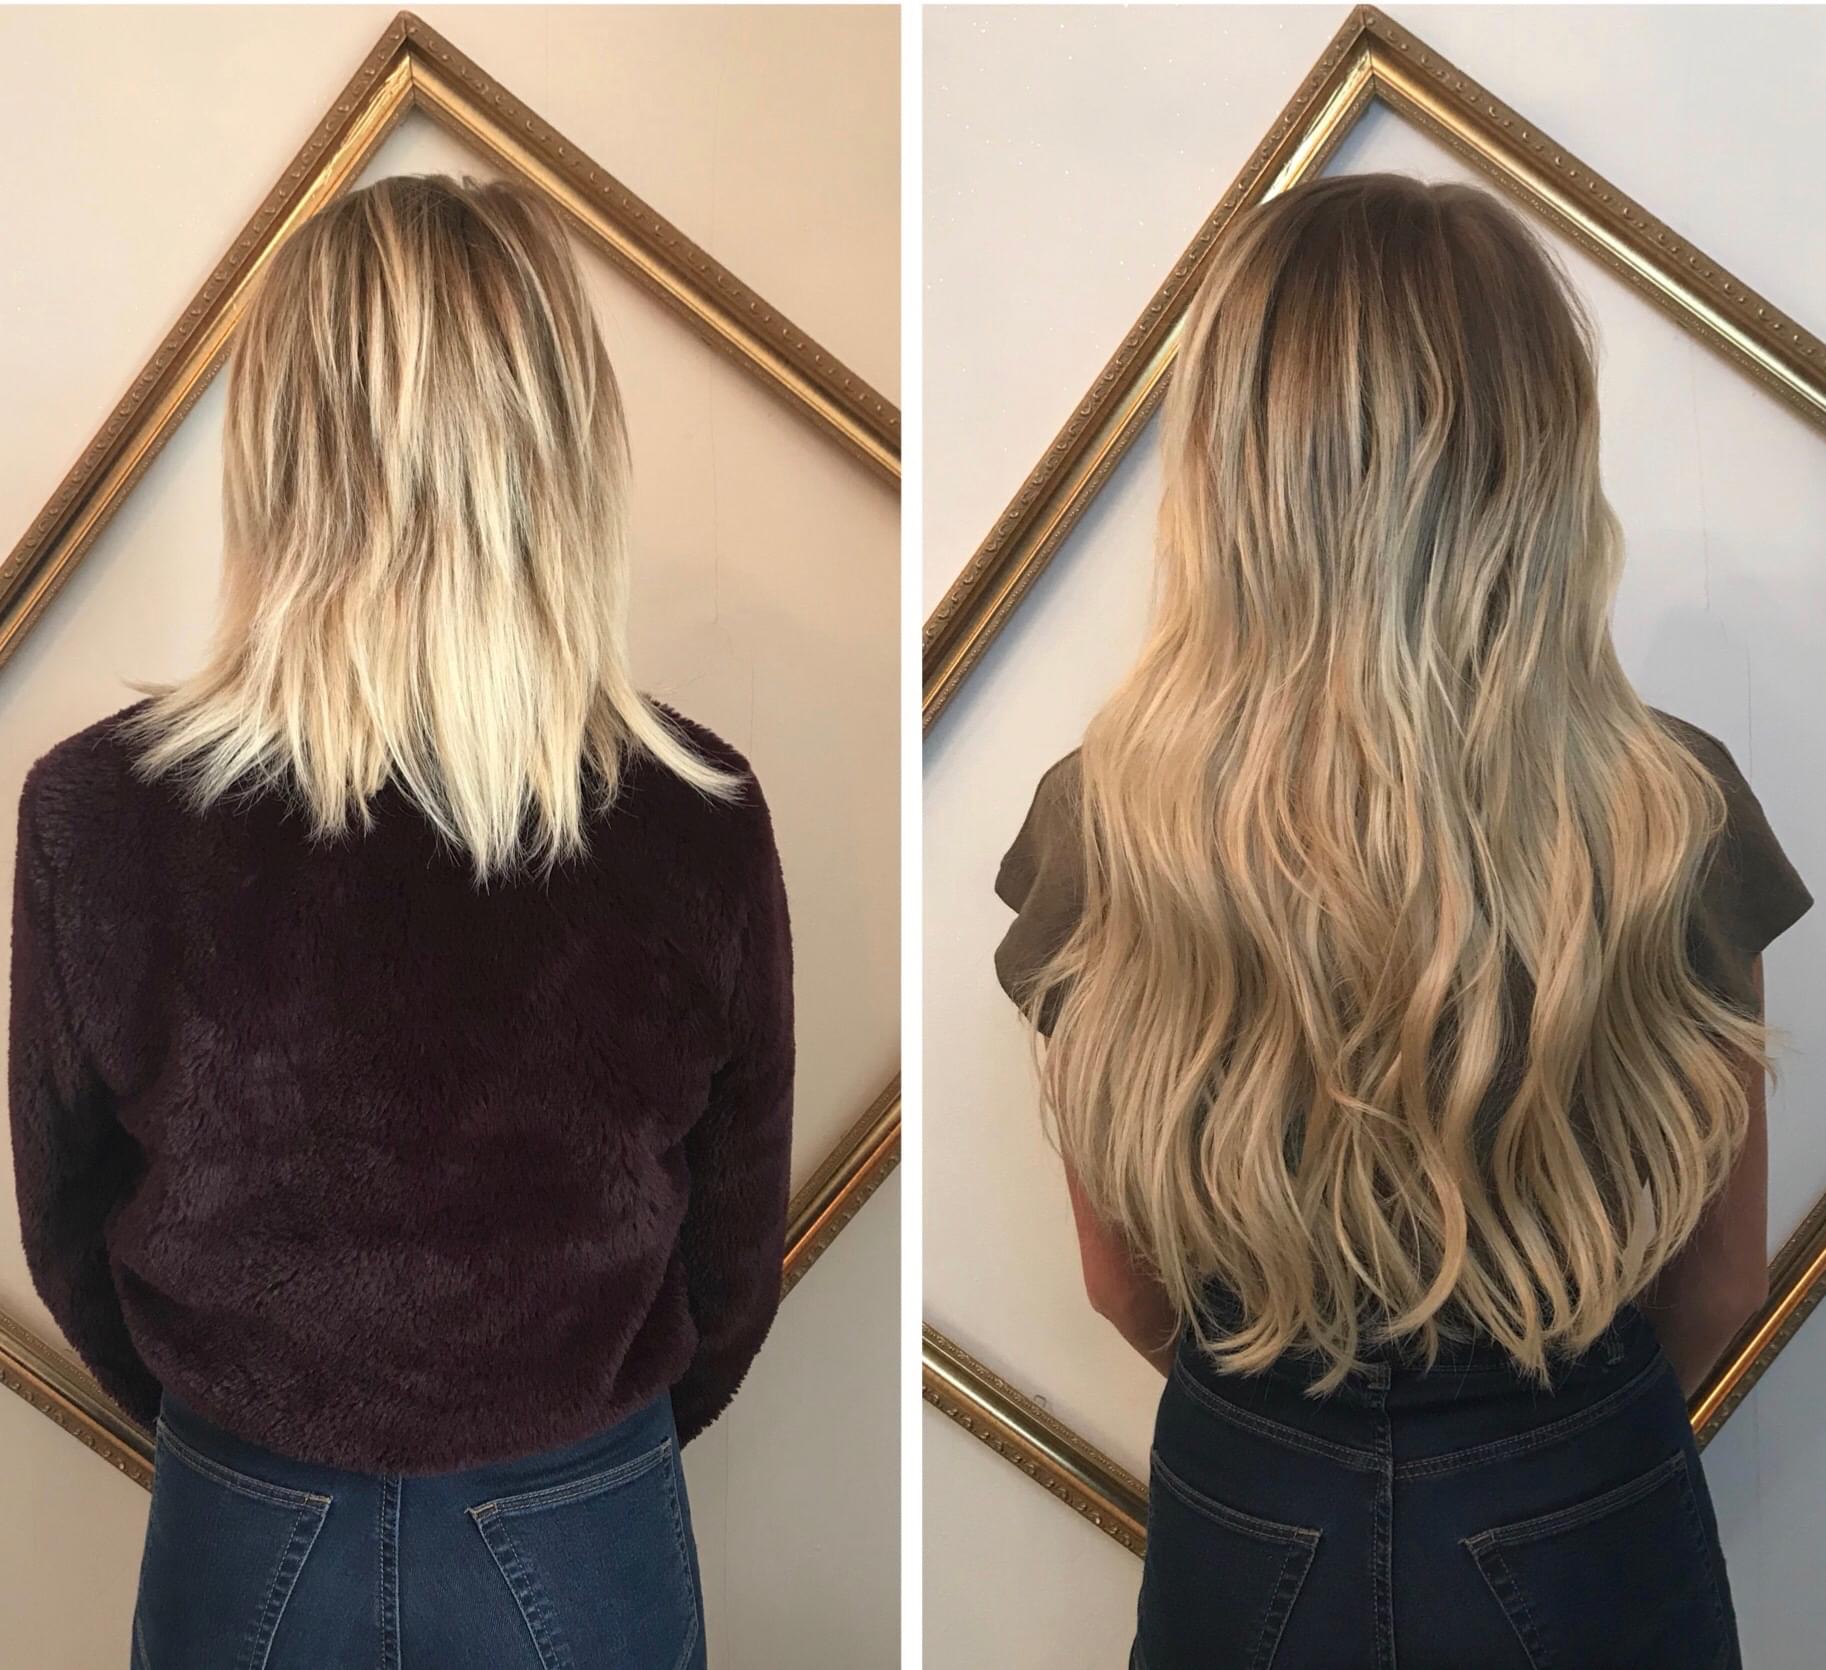 Before and After ManeMaxx Hair Extensions